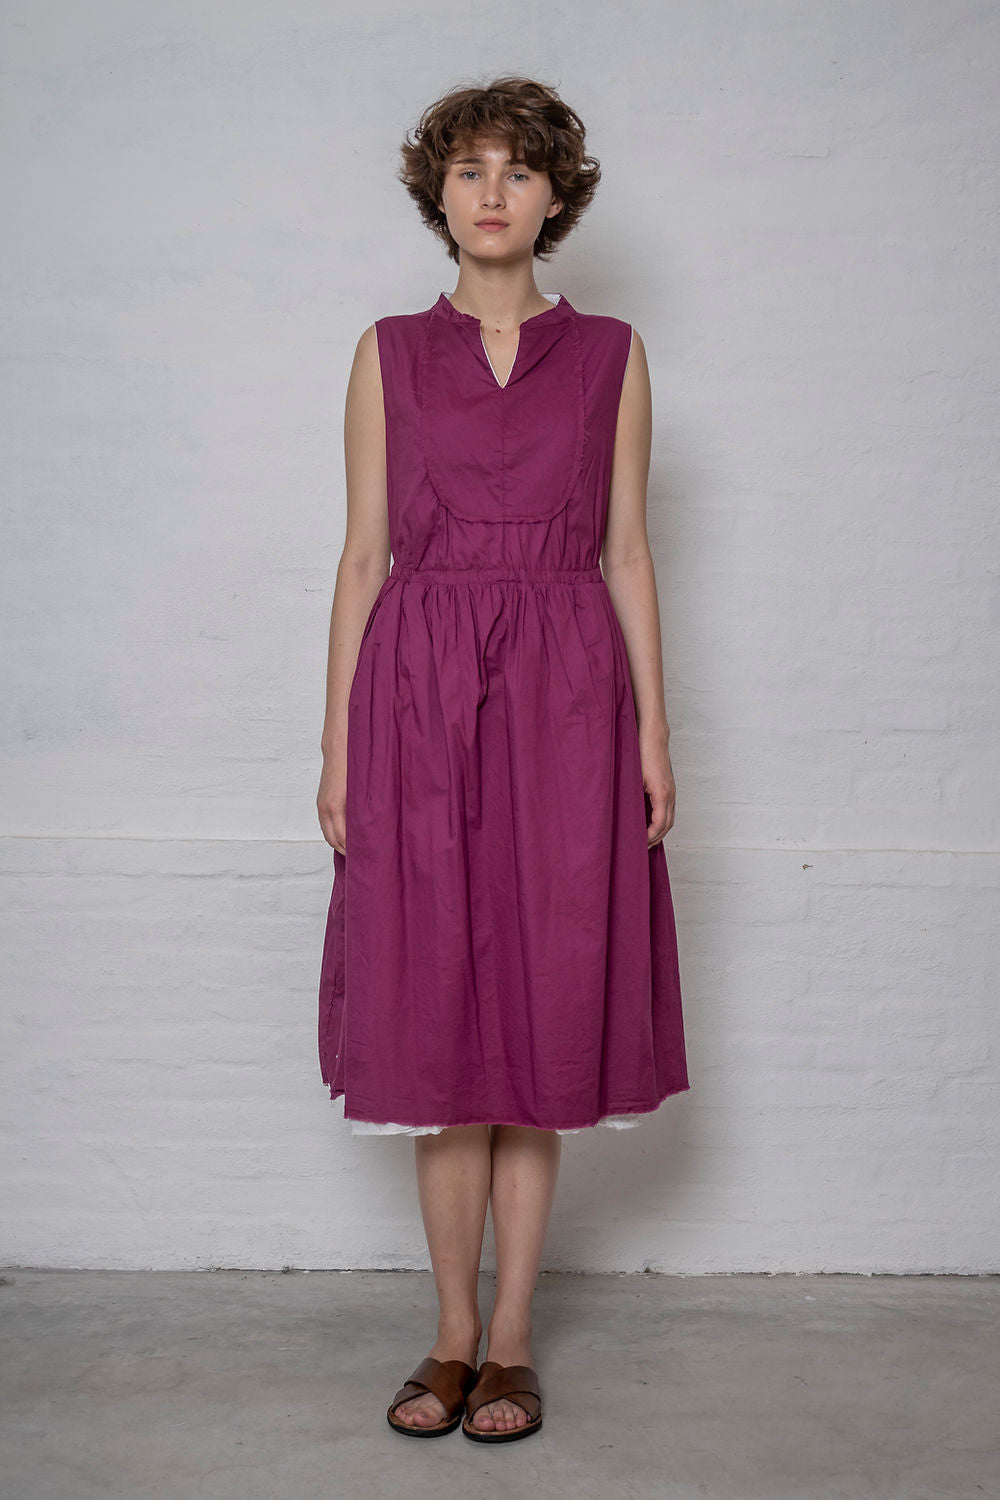 Roby Dress - Berry